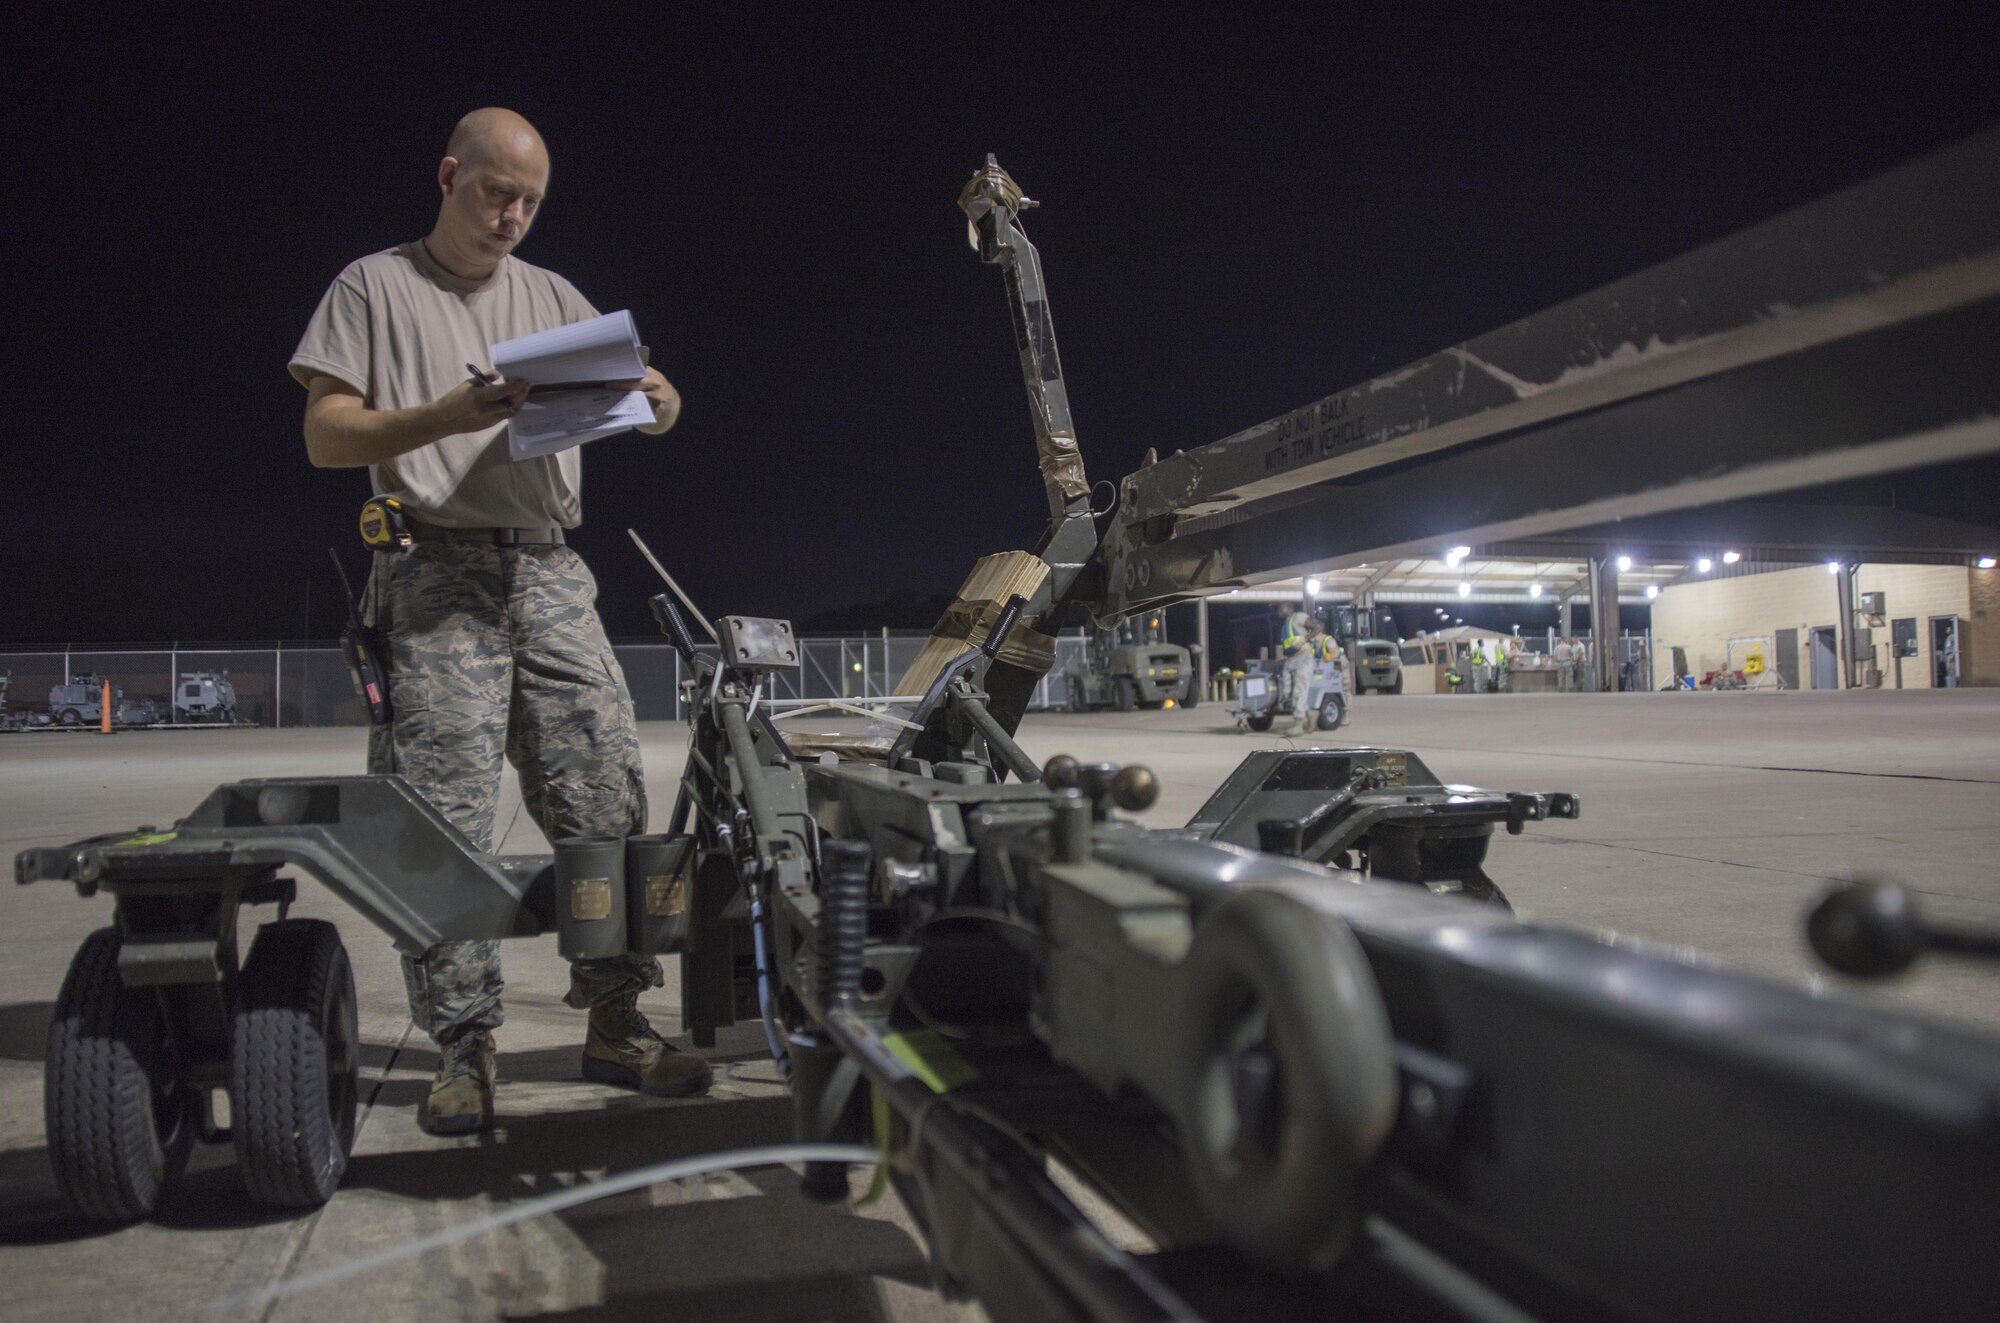 Staff Sgt. Richard Averitt, 4th Logistics Readiness Squadron air transportation specialist, verifies the dimensions and weight of a weapon loader to be loaded onto an aircraft July 20, 2017, at Seymour Johnson Air Force Base, North Carolina. This cargo was part of exercise Thunderdome 17-02, which is designed to evaluate the 4th Fighter Wing’s ability to generate and deploy aircraft, Airmen and equipment. (U.S. Air Force photo by Tech. Sgt. David W. Carbajal)